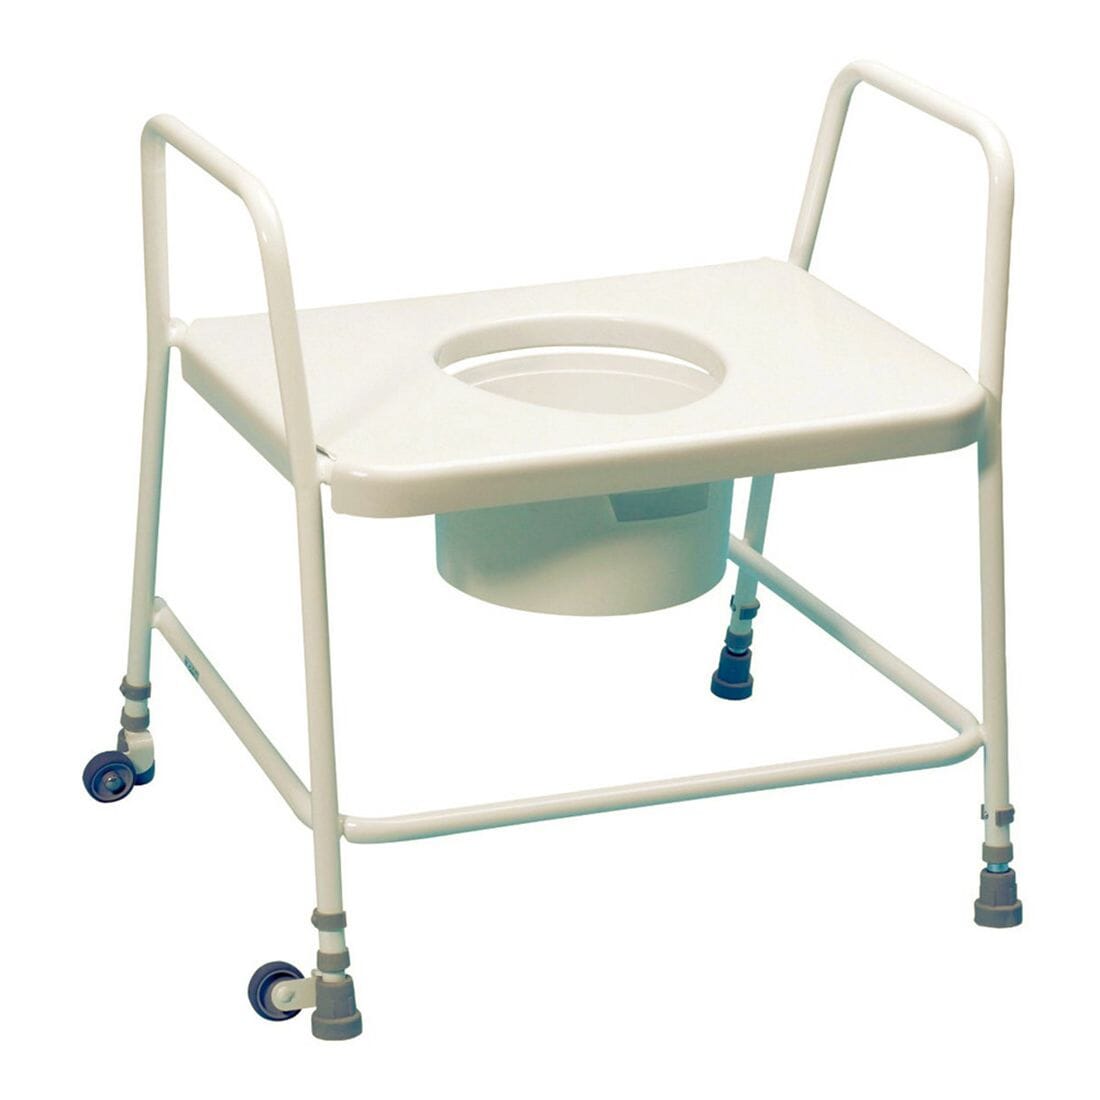 View Extra Wide Toilet Frame information